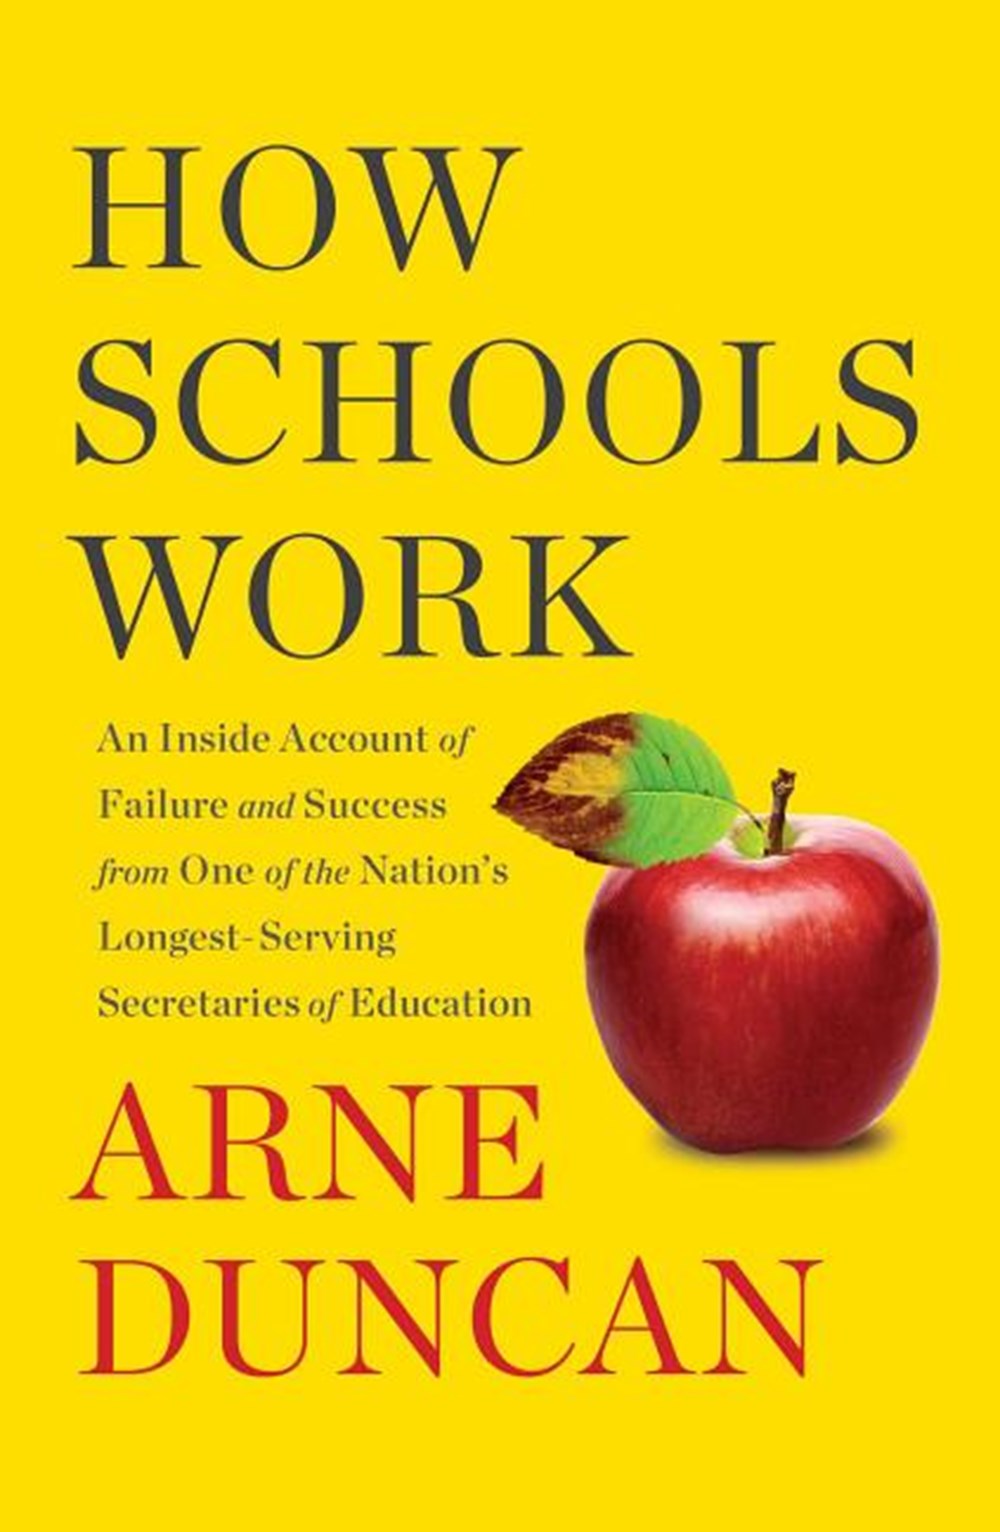 How Schools Work: An Inside Account of Failure and Success from One of the Nation's Longest-Serving 